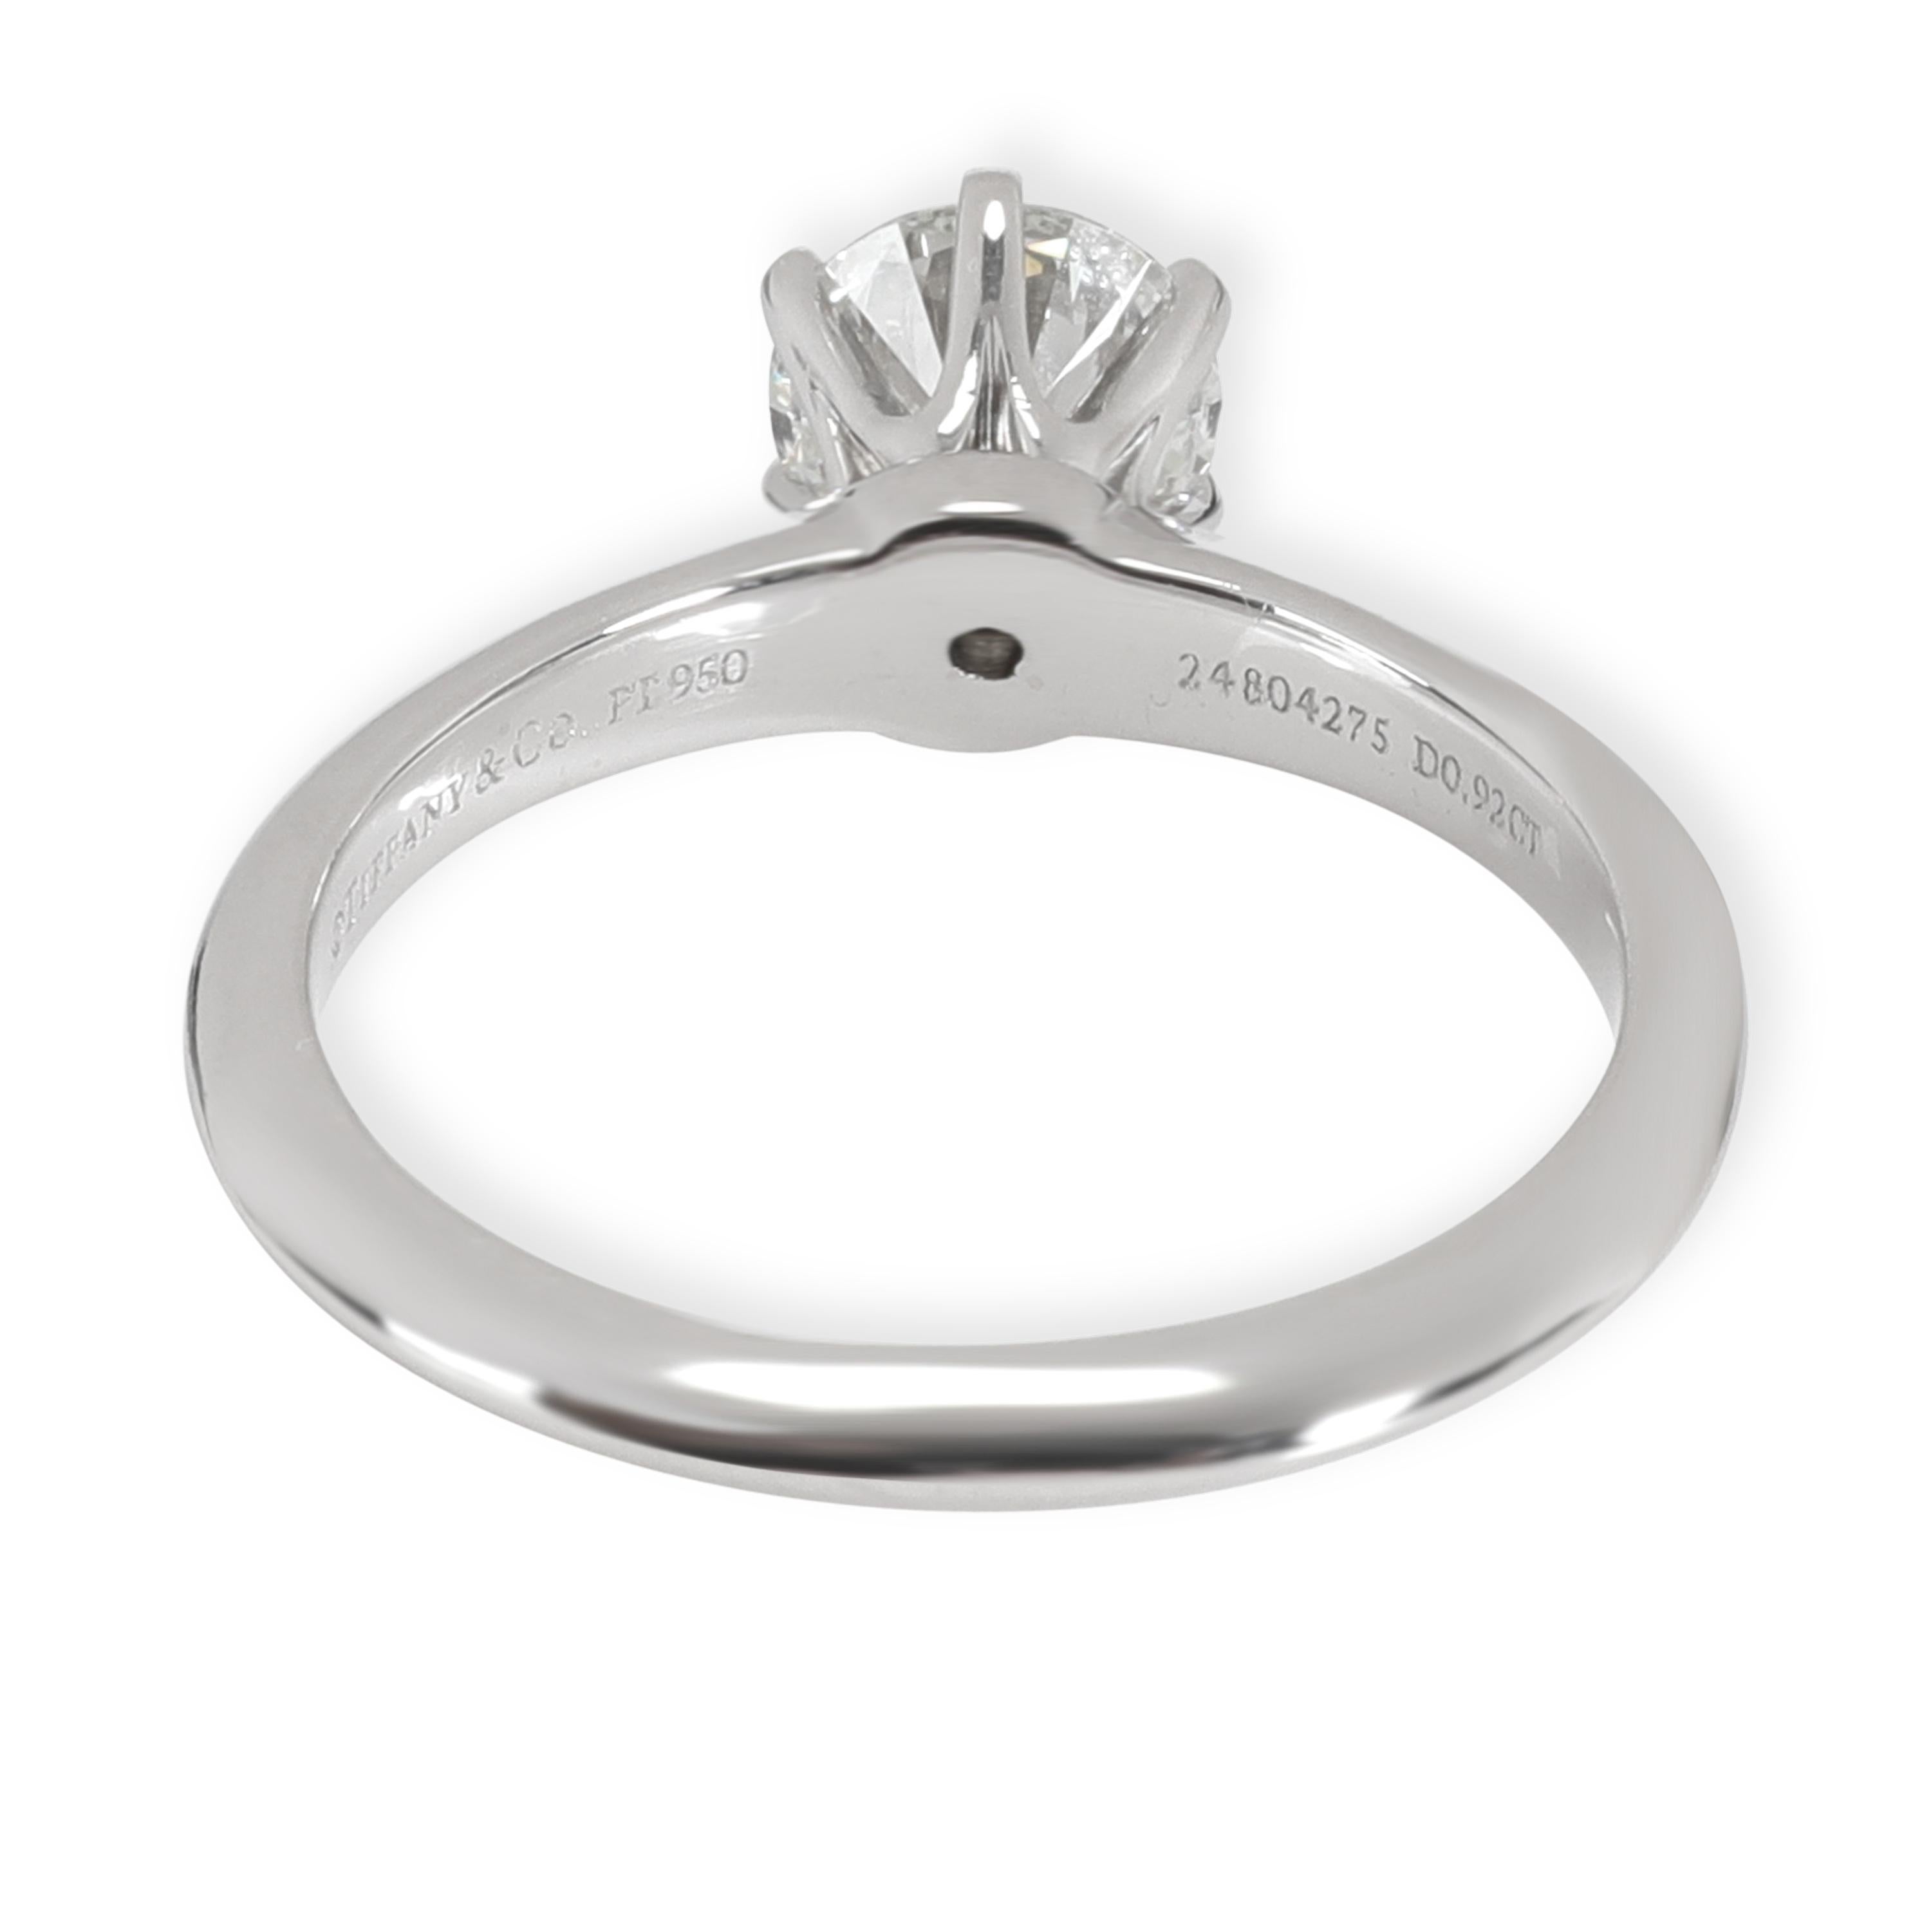 

Tiffany & Co. Solitaire Diamond Ring in Platinum G IF 0.92 CTW

SKU: 106545
Listing Title: Tiffany & Co. Solitaire Diamond Ring in Platinum G IF 0.92 CTW
Condition Description: Retails for 14,350 USD. In excellent condition and recently polished.